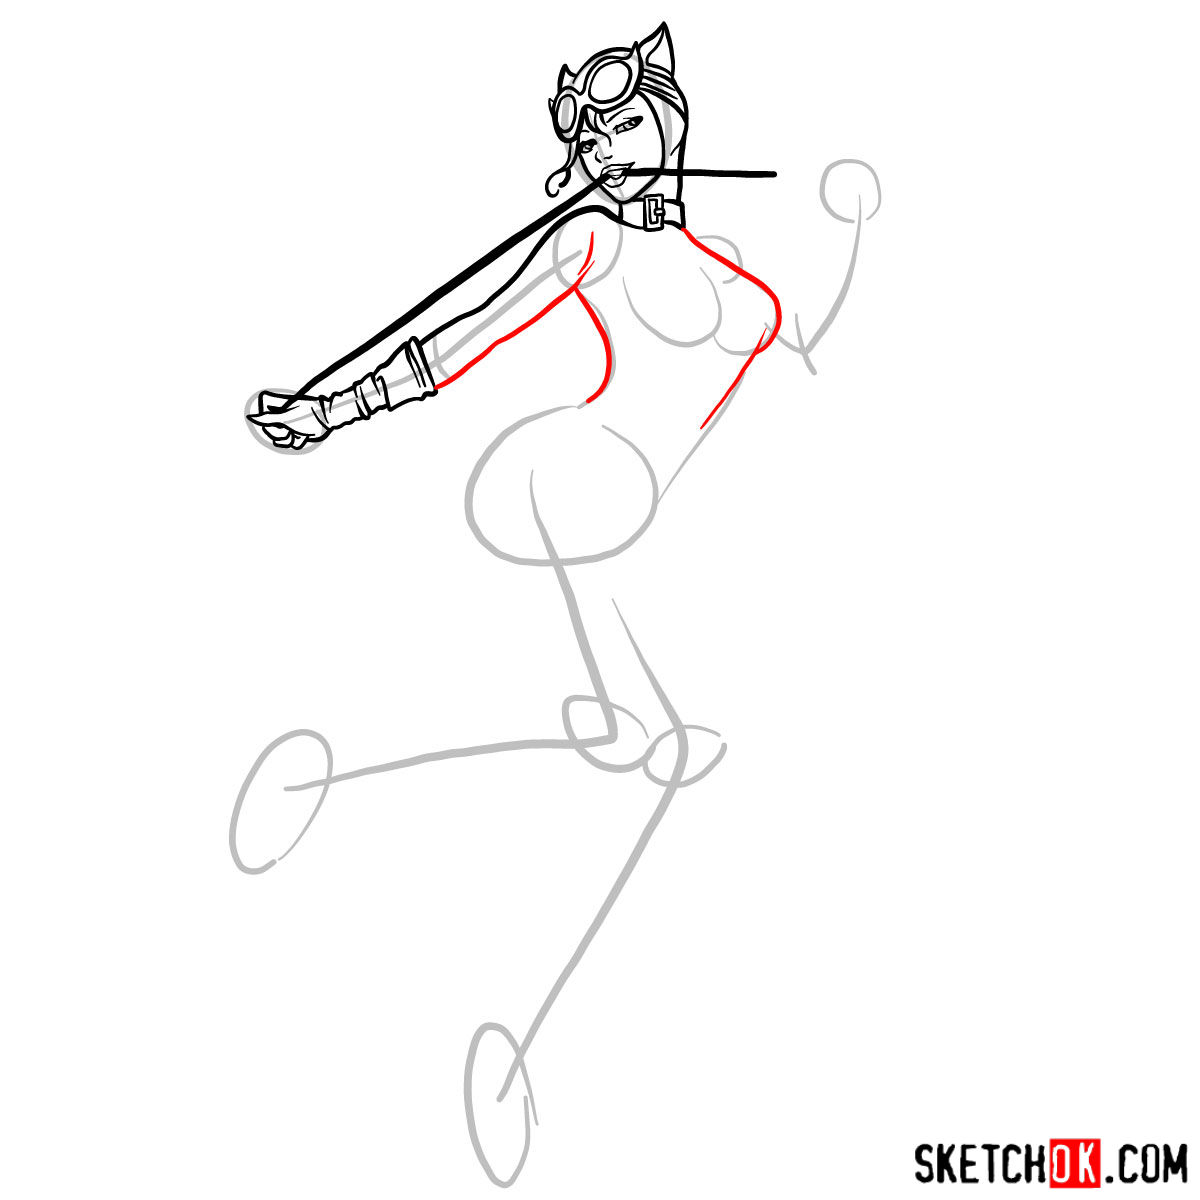 How to draw Catwoman superheroine from DC Comics - step 08